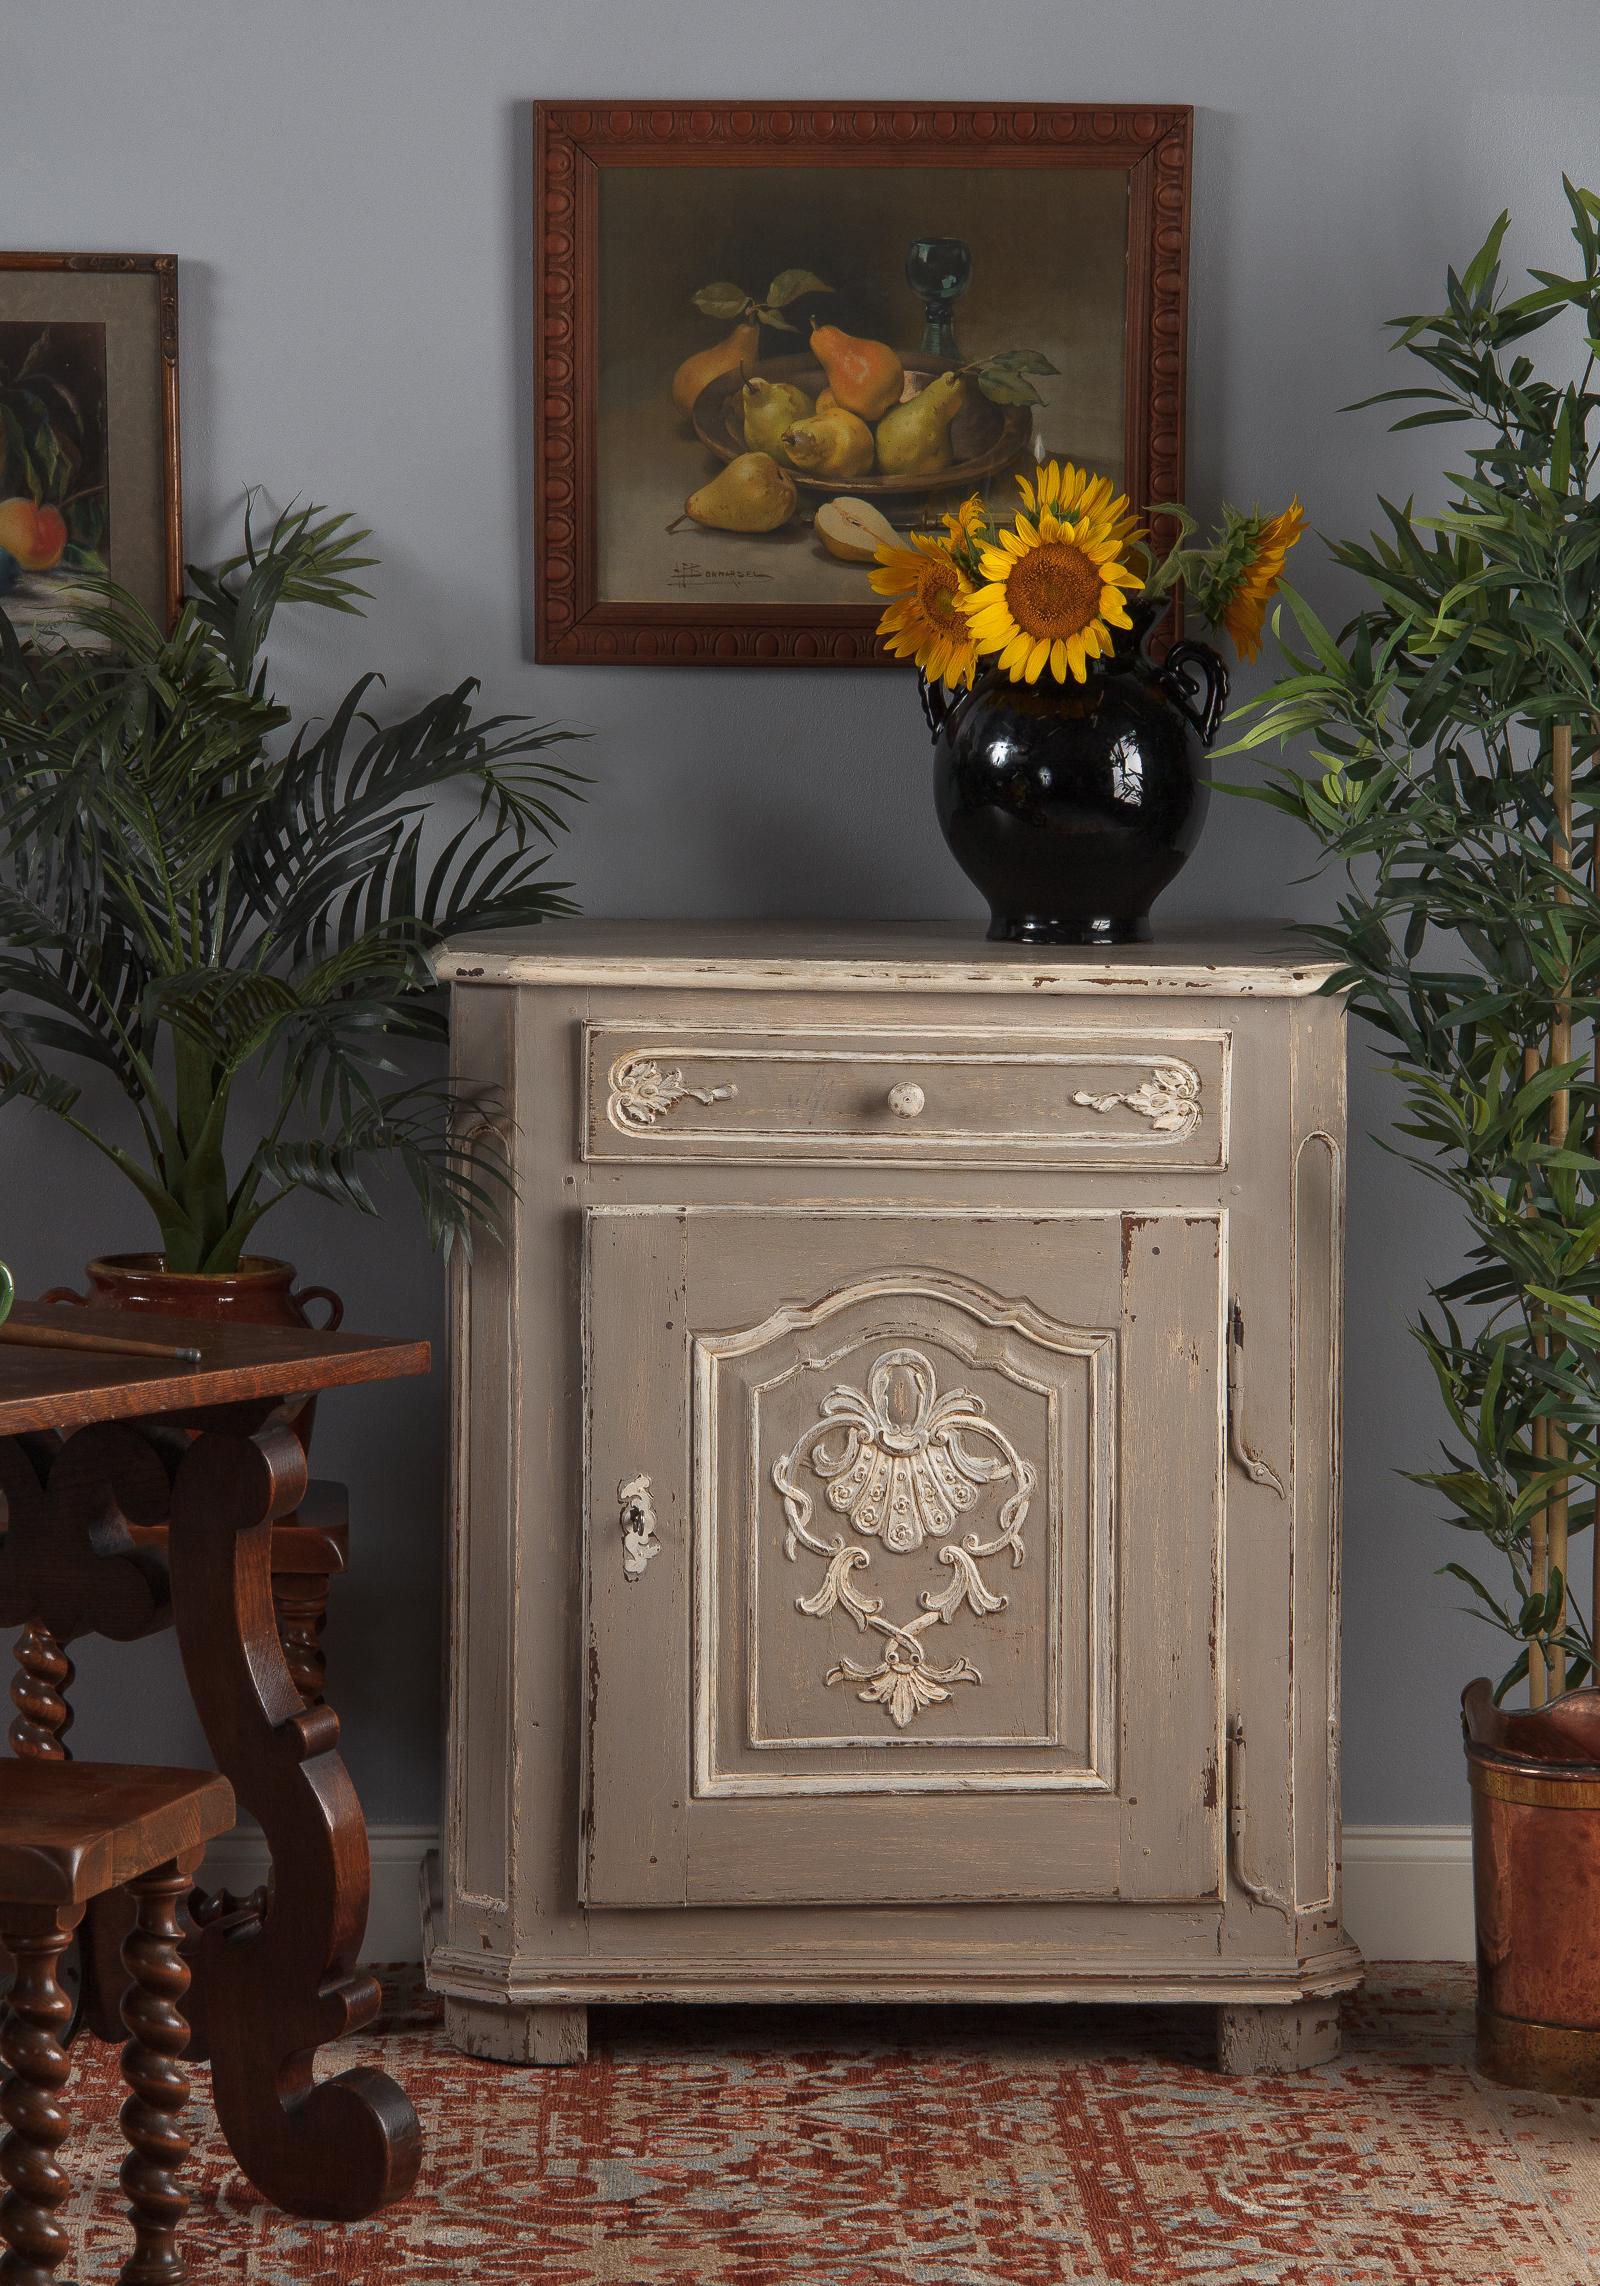 A charming oak painted Louis XIV confiturier or preserves cabinet, French 18th century. Distressed light gray paint with cream highlighting the decorative details. Paneled sides and canted front corners, a single drawer on top with a single door